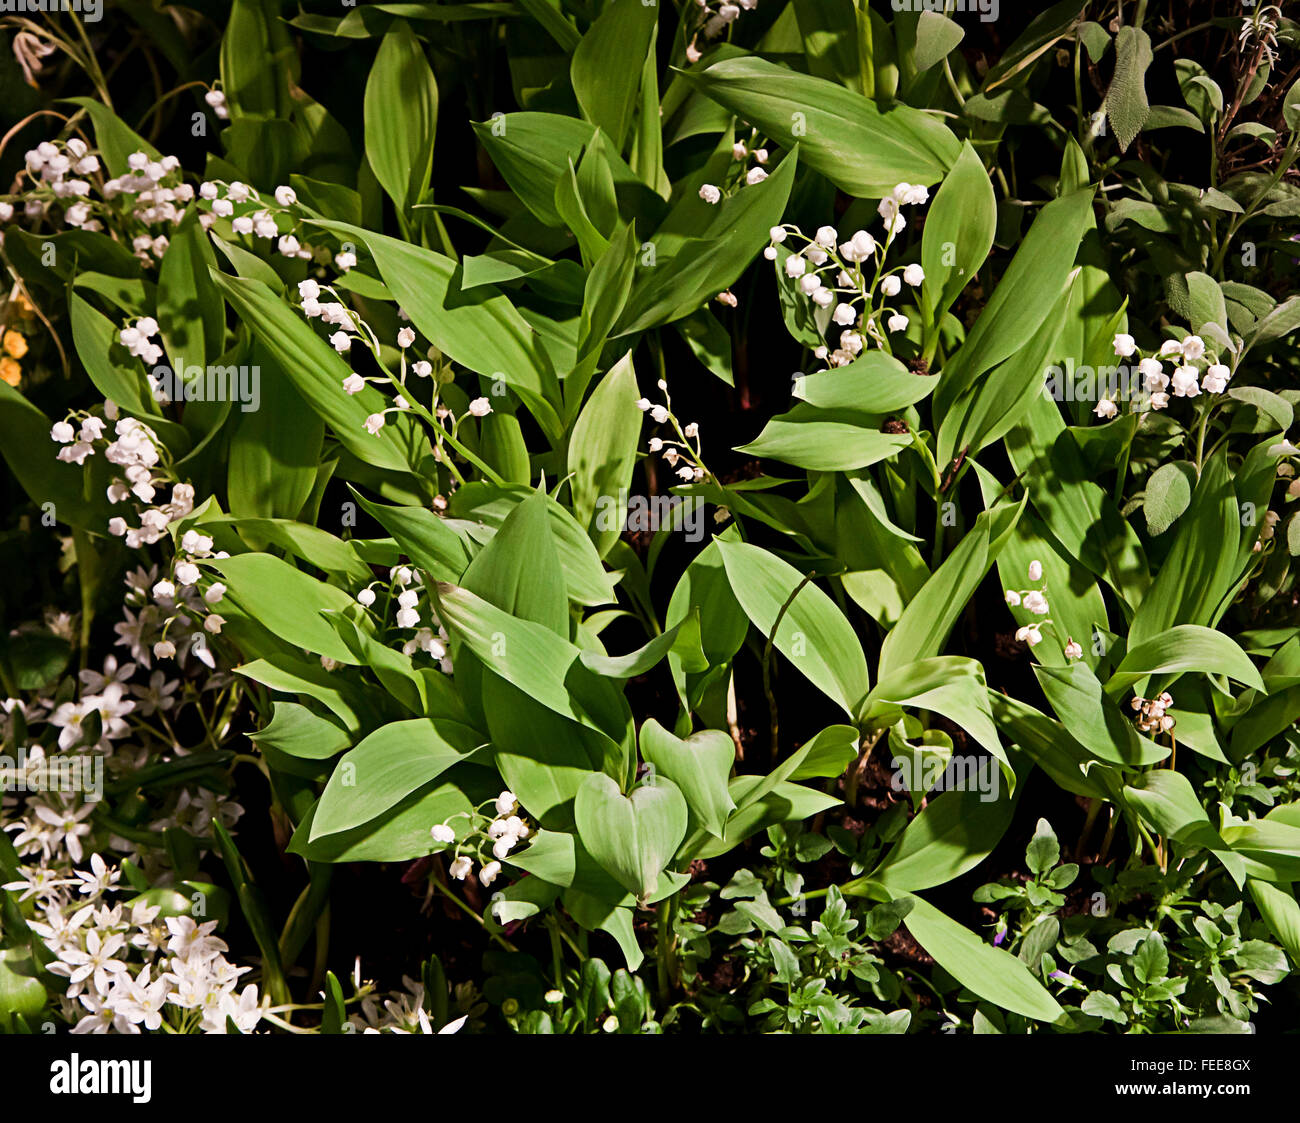 Lily of the valley flowerbed on springtime, sweetly scented but poisonous plant Stock Photo